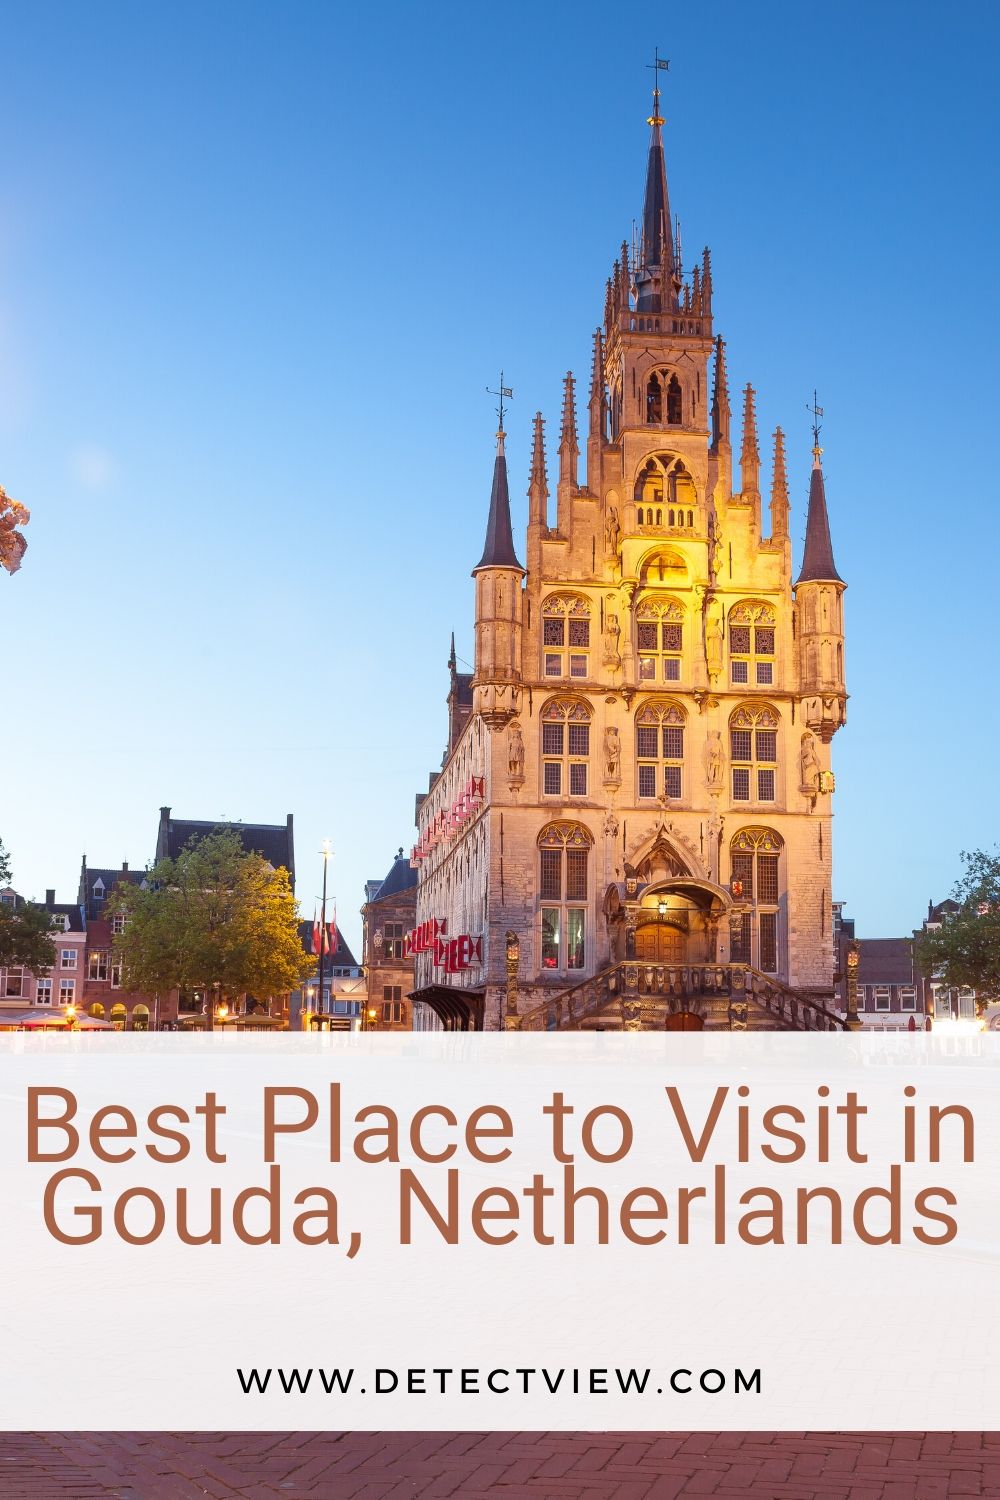 Best Place to Visit in Gouda, Netherlands